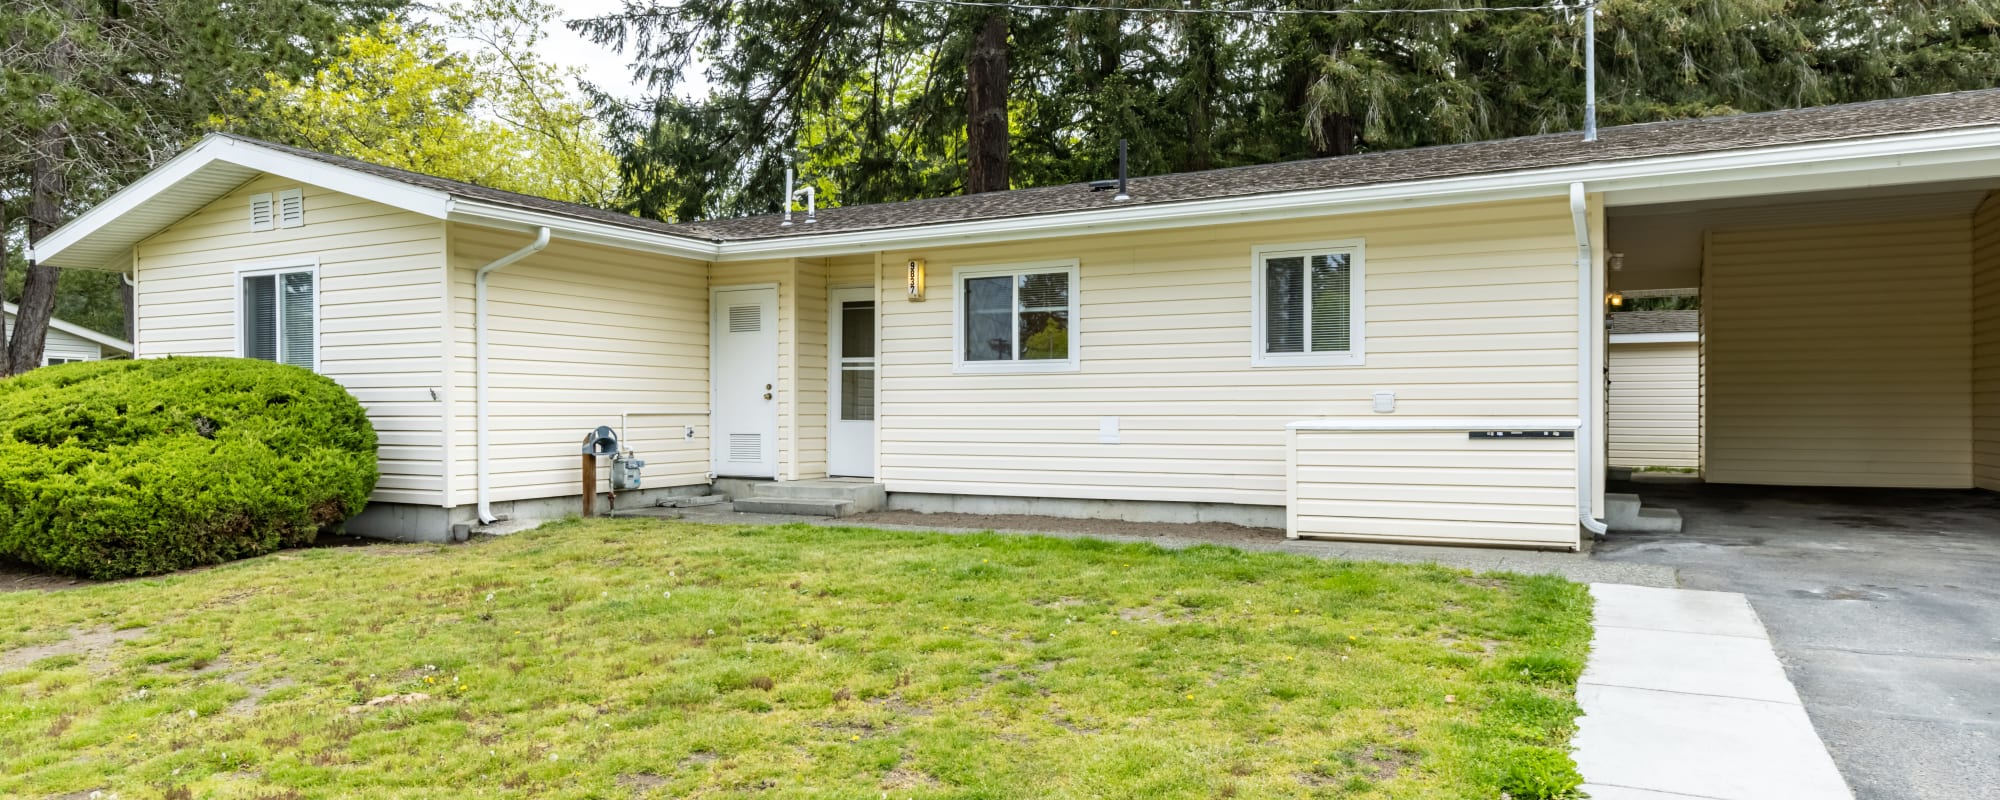 Exterior of home at Madigan in Joint Base Lewis McChord, Washington